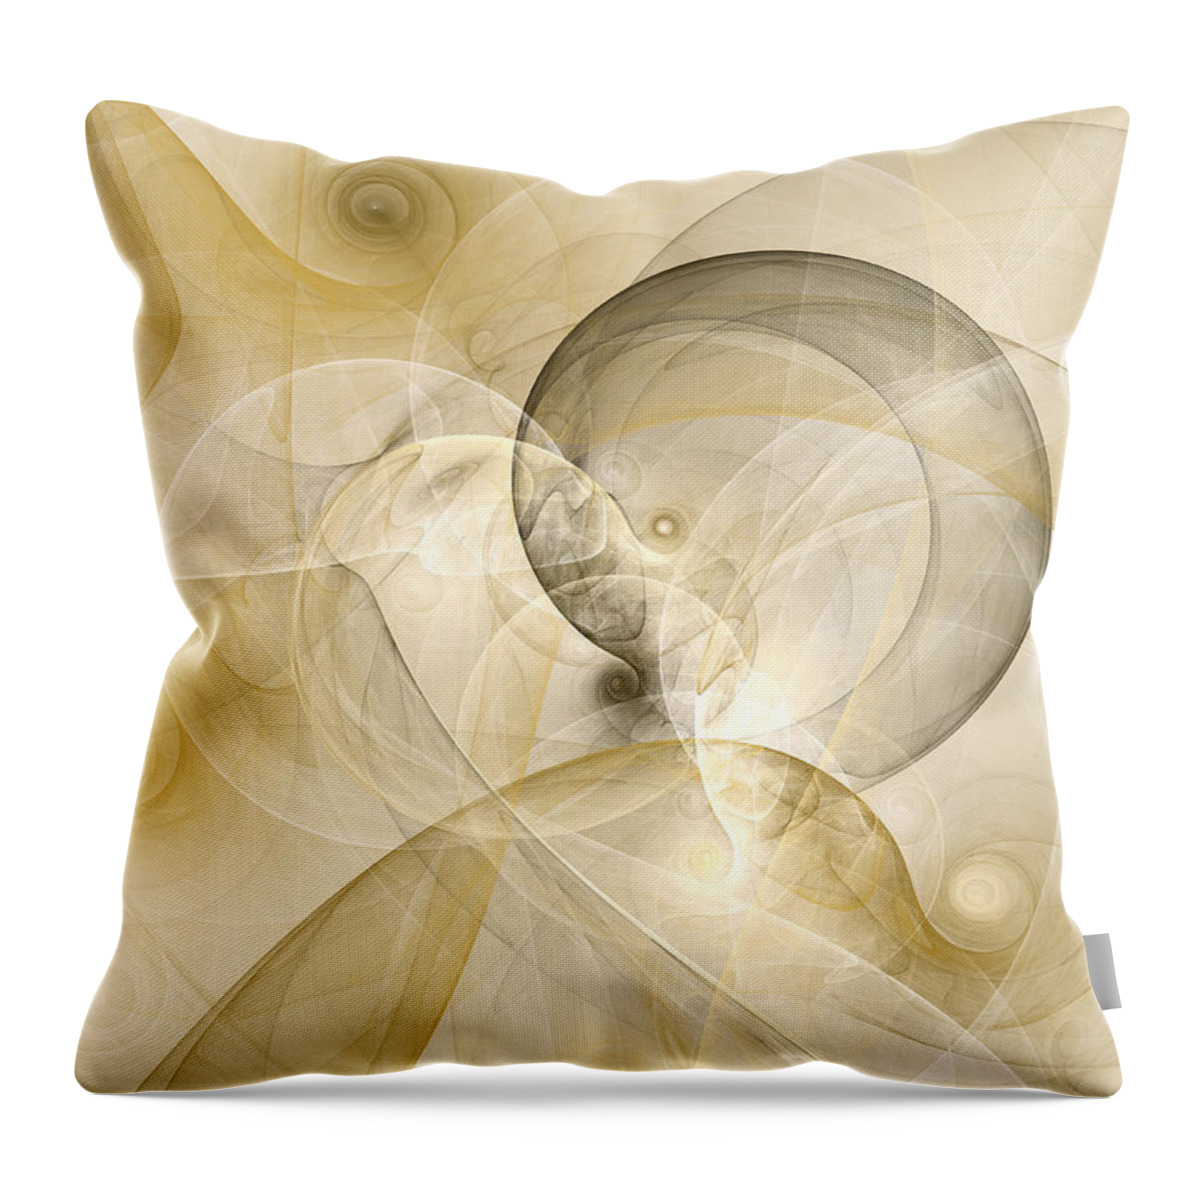 Abstract Throw Pillow featuring the digital art Series Abstract Art in Earth Tones 3 by Gabiw Art